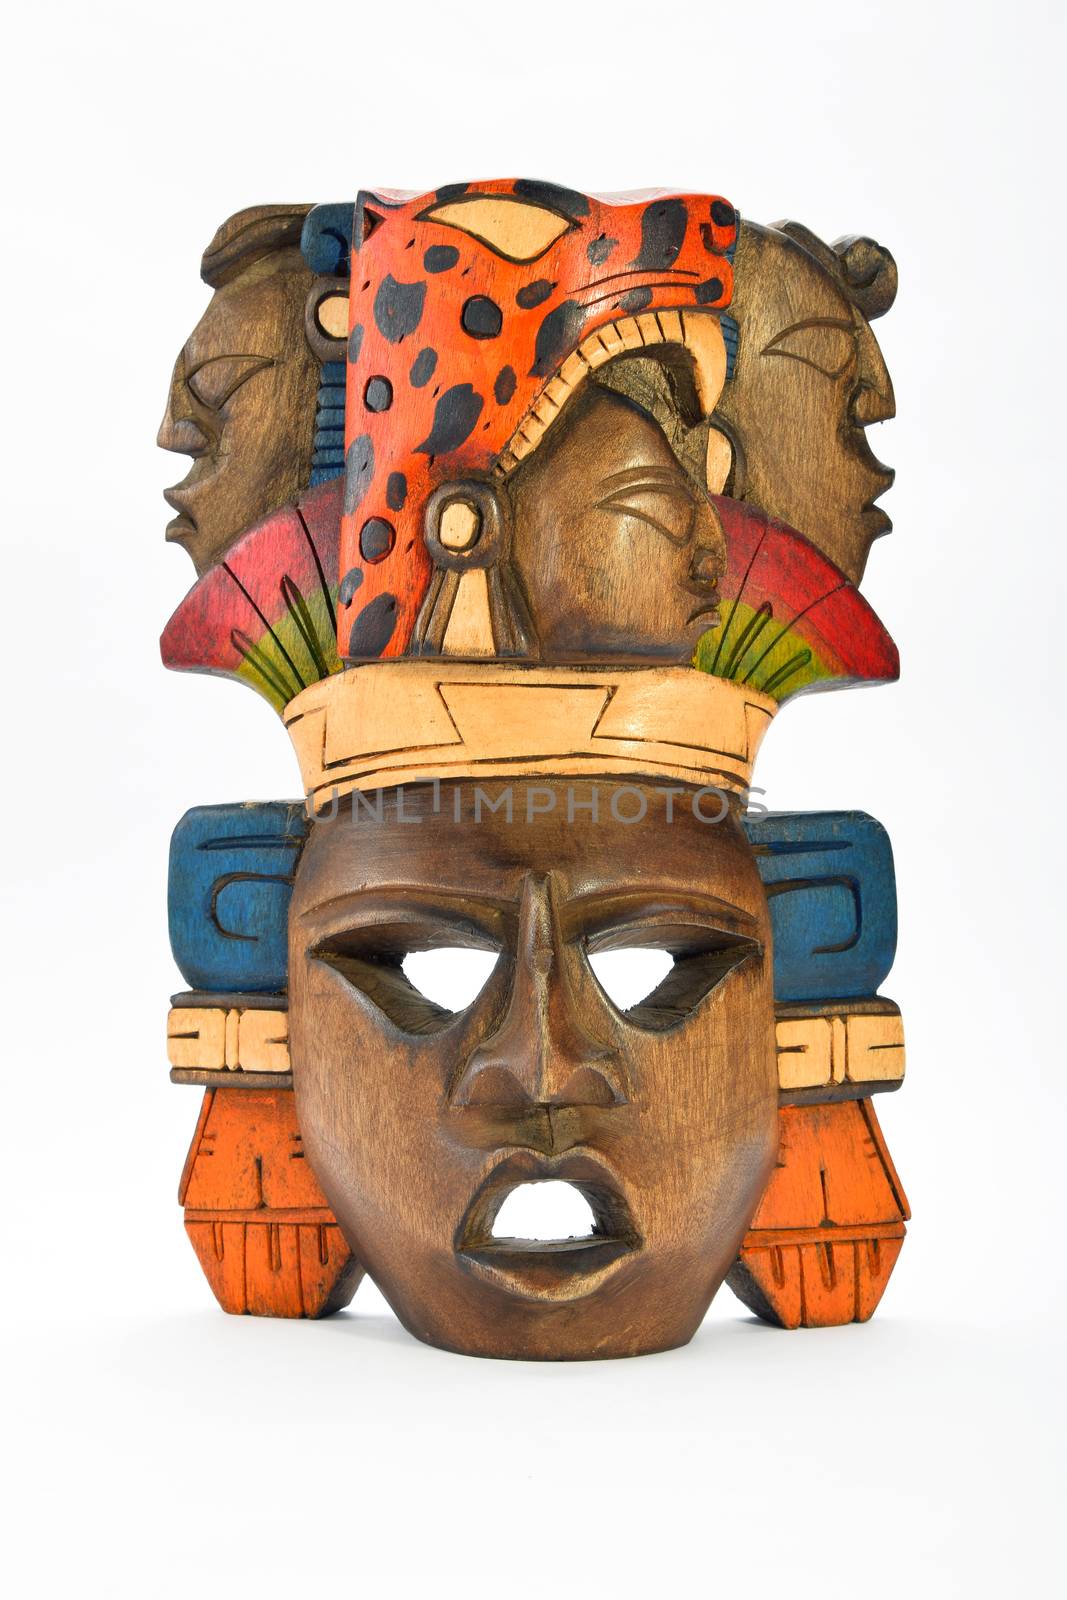 Indian Mayan Aztec wooden painted mask with roaring jaguar and h by BreakingTheWalls